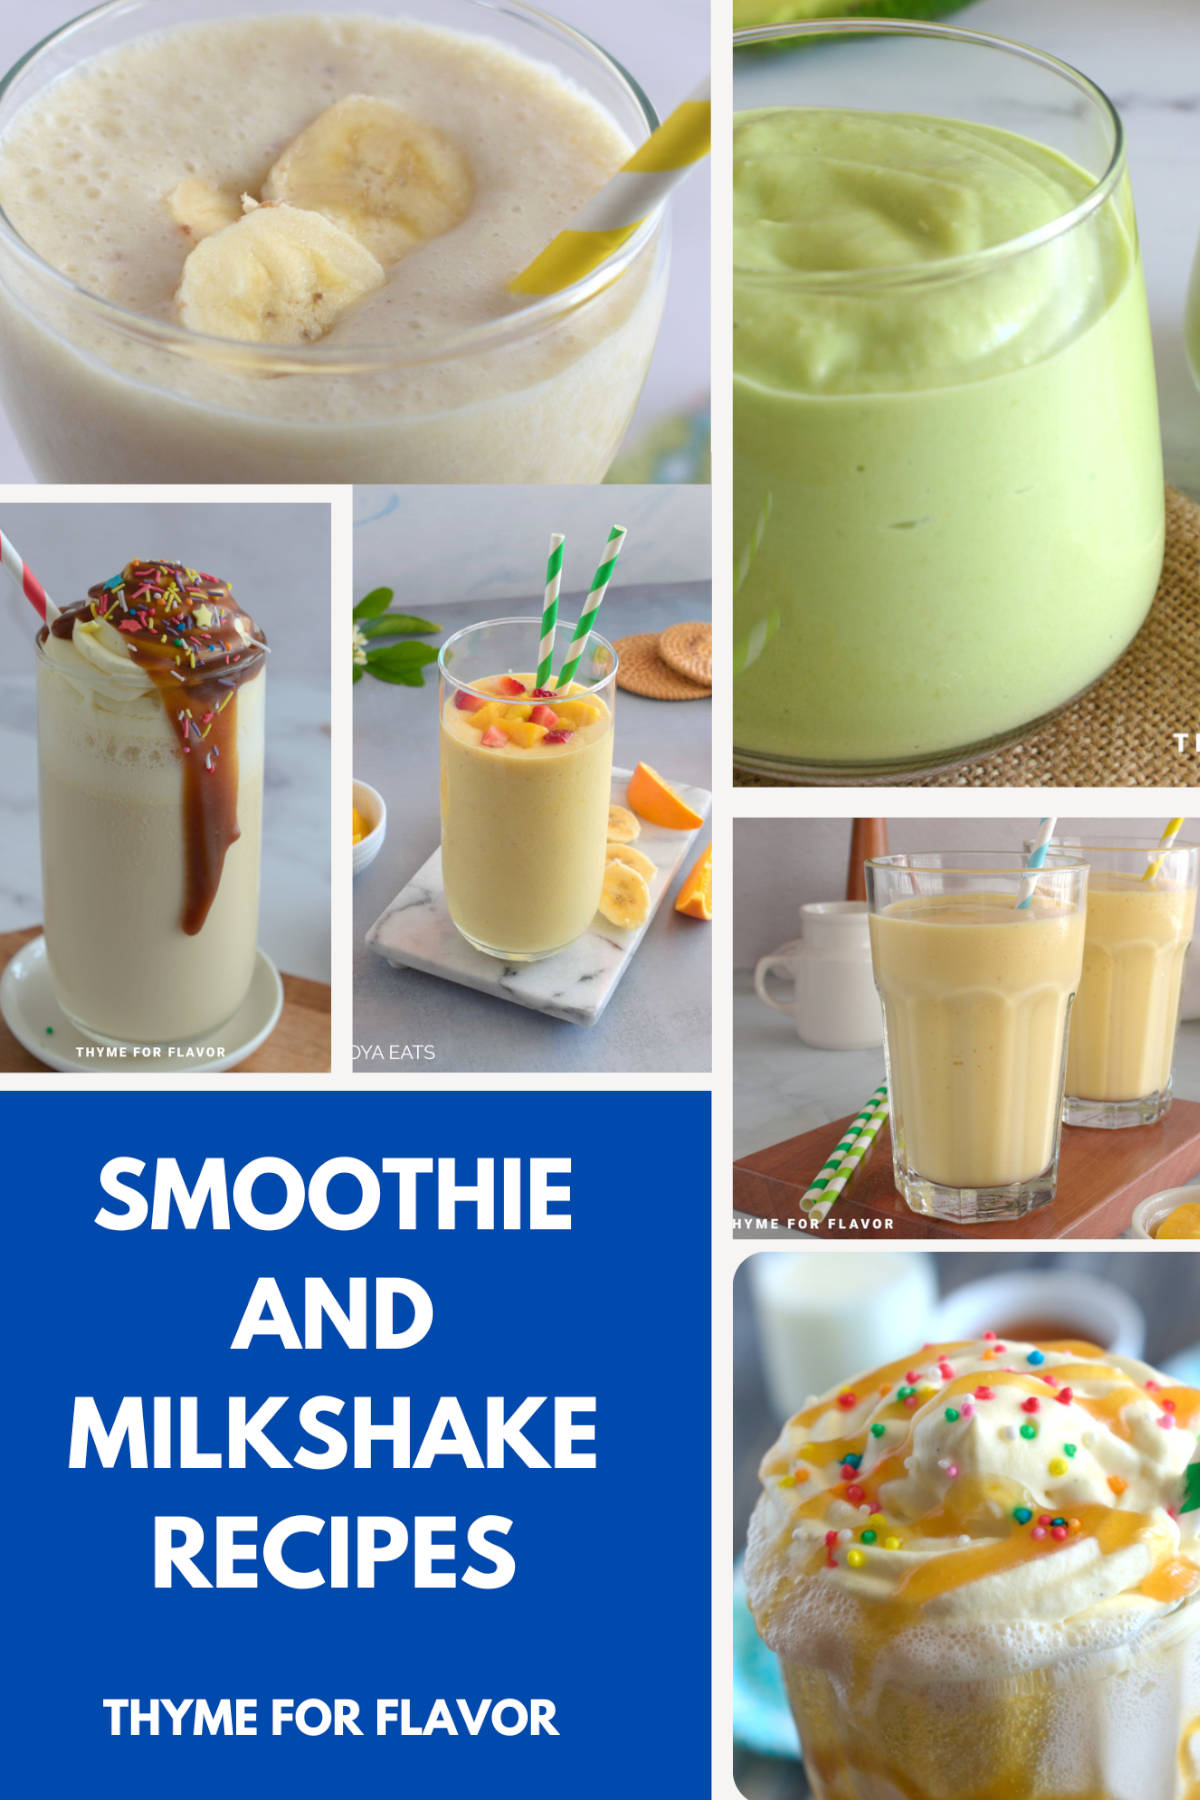 Collection of milkshake and smoothie recipe images.